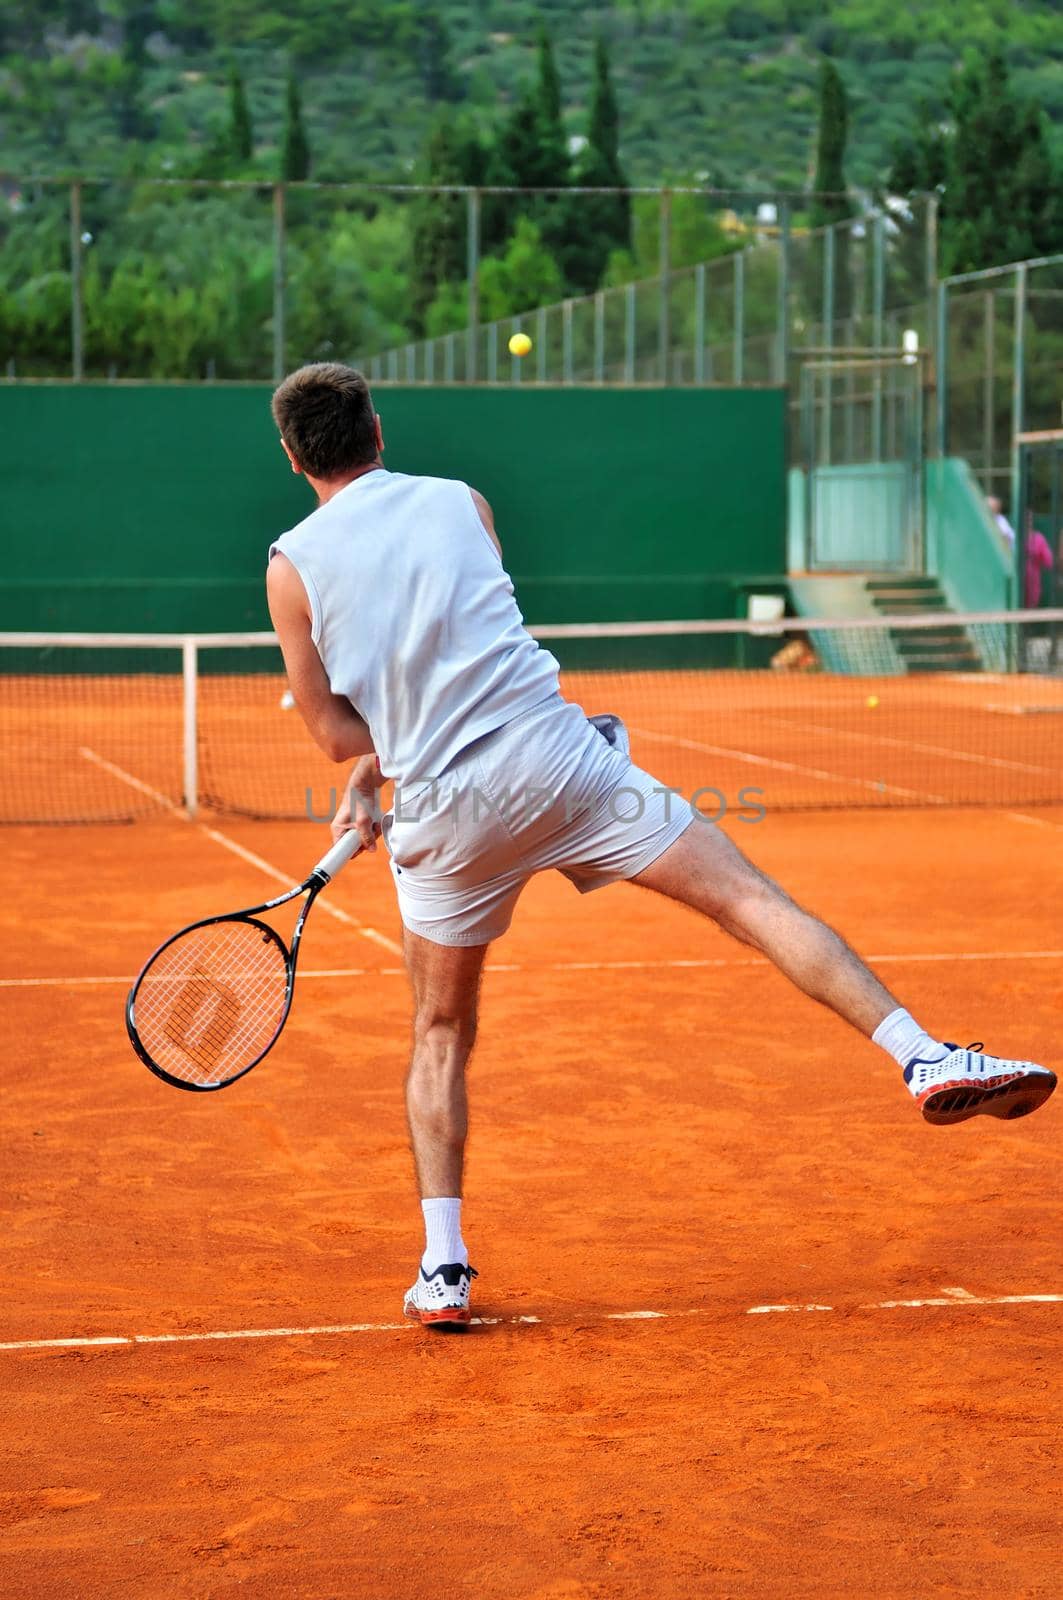 One man play tennis on outdoor court